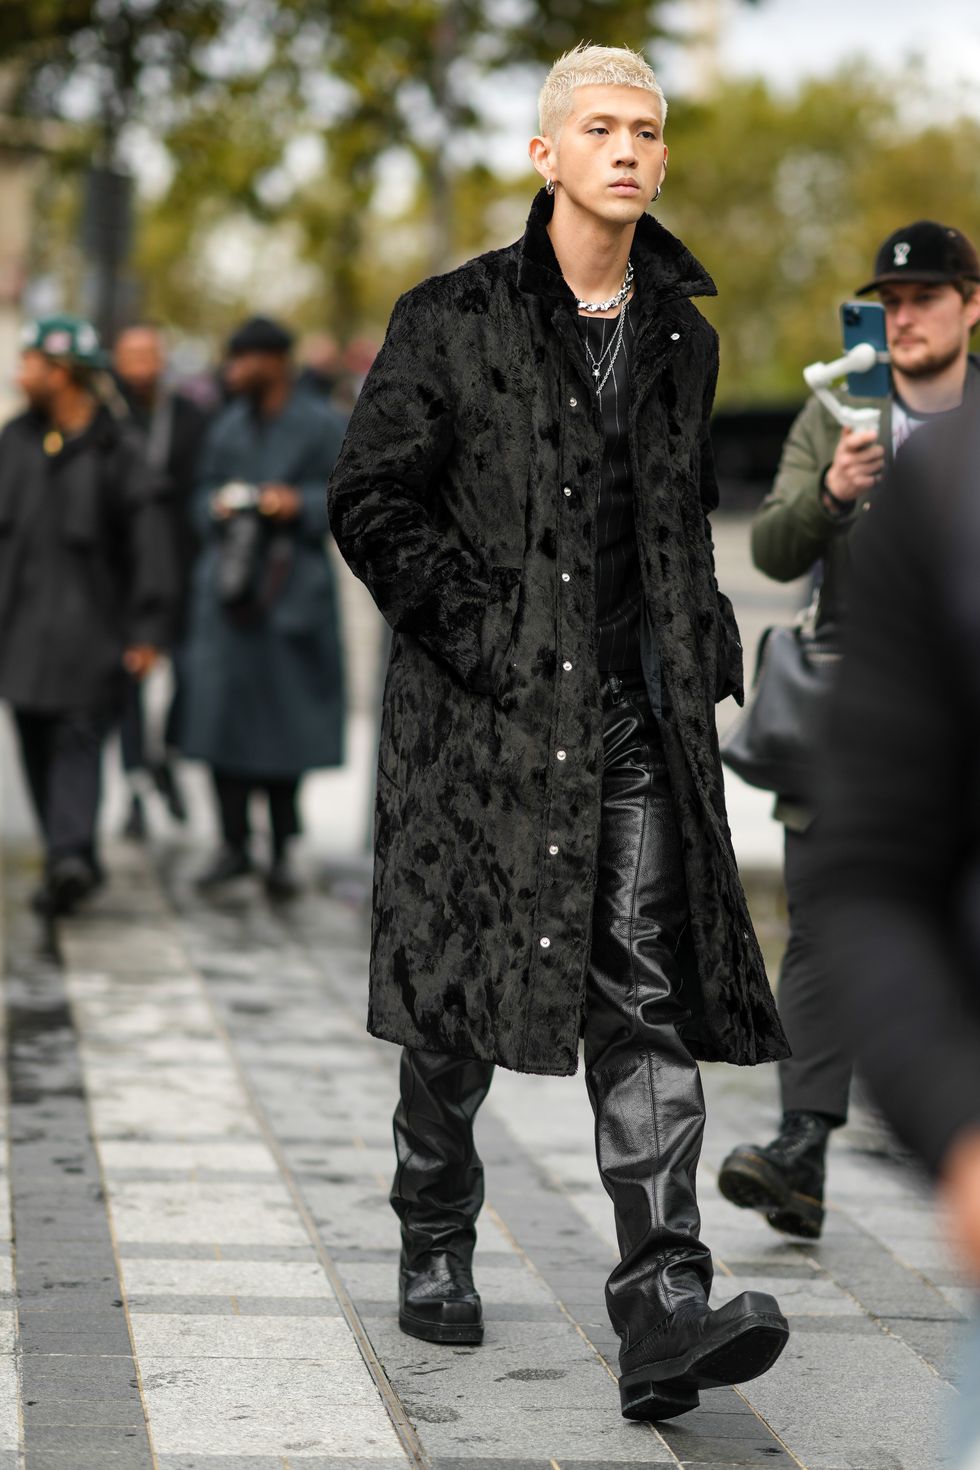 The 4 Things to Consider When Buying a Winter Coat, According to Experts -  Fashionista